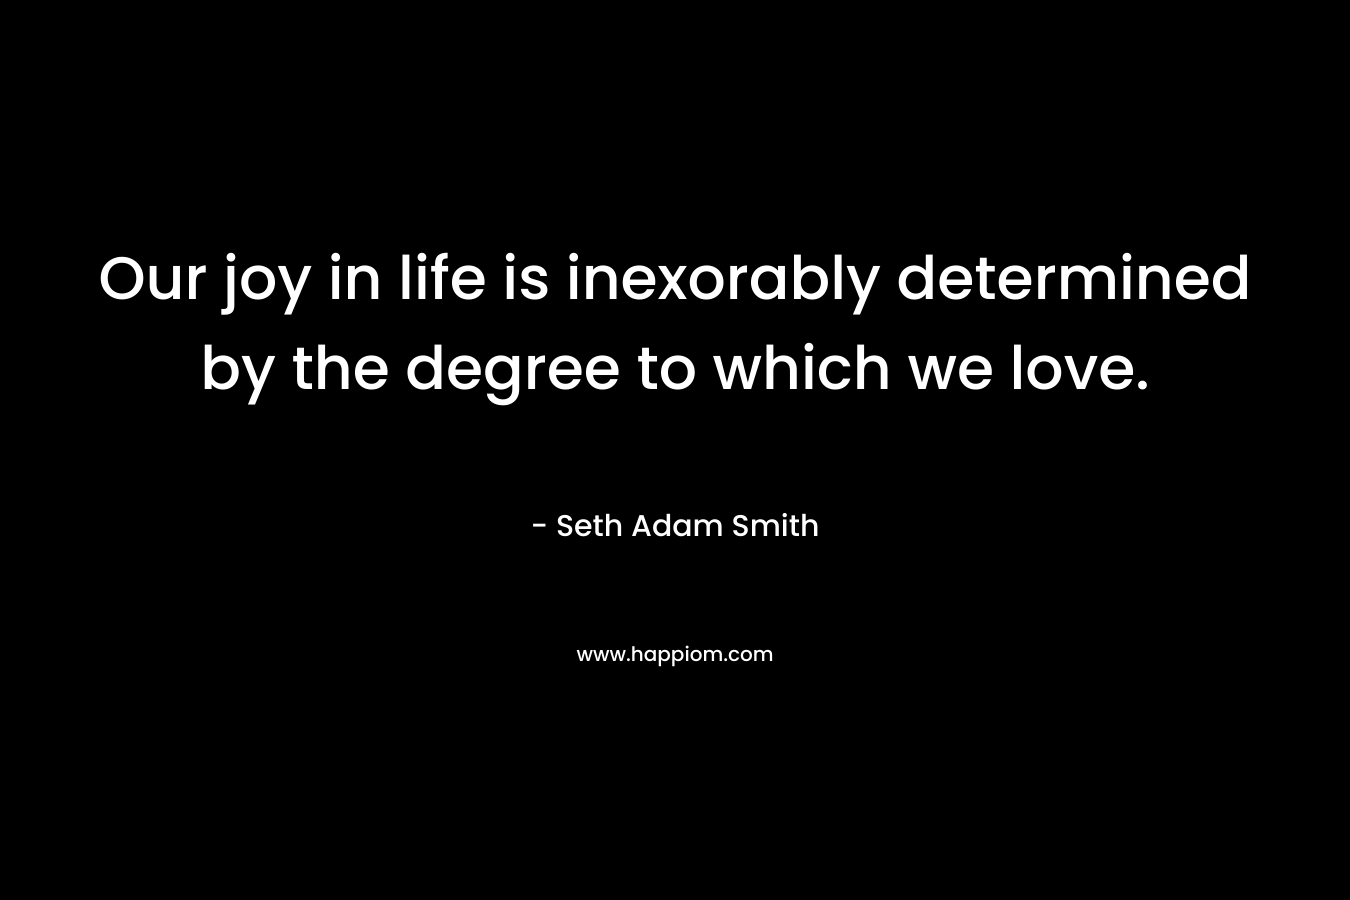 Our joy in life is inexorably determined by the degree to which we love.